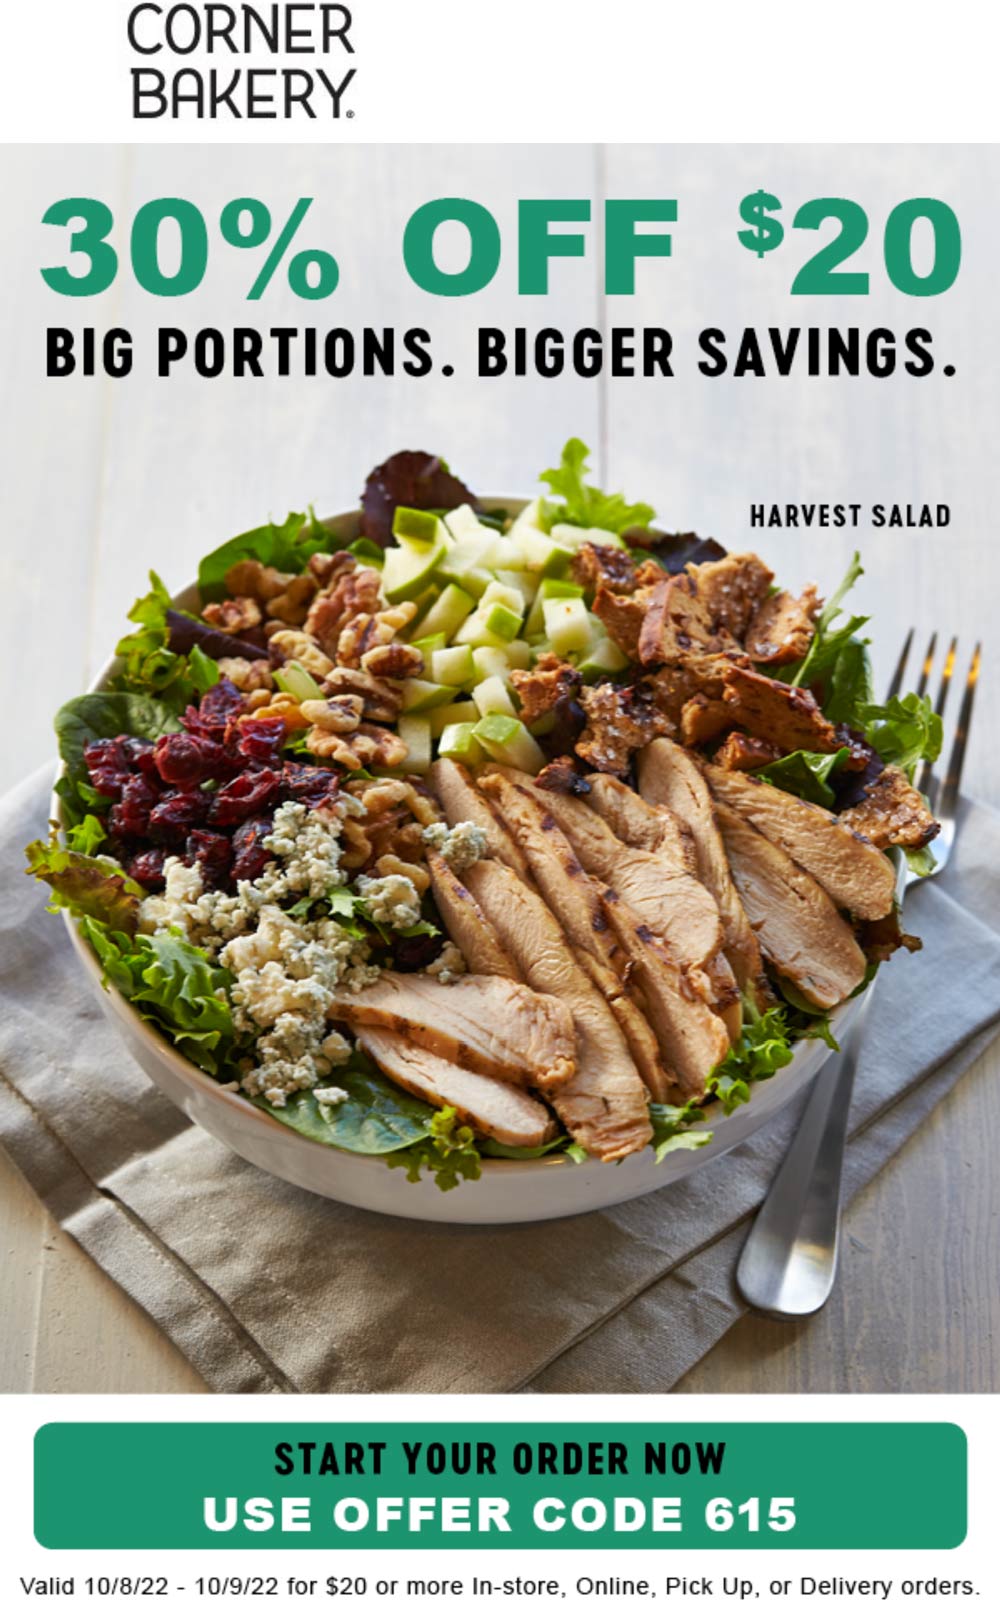 Corner Bakery restaurants Coupon  30% off $20+ today at Corner Bakery restaurants #cornerbakery 